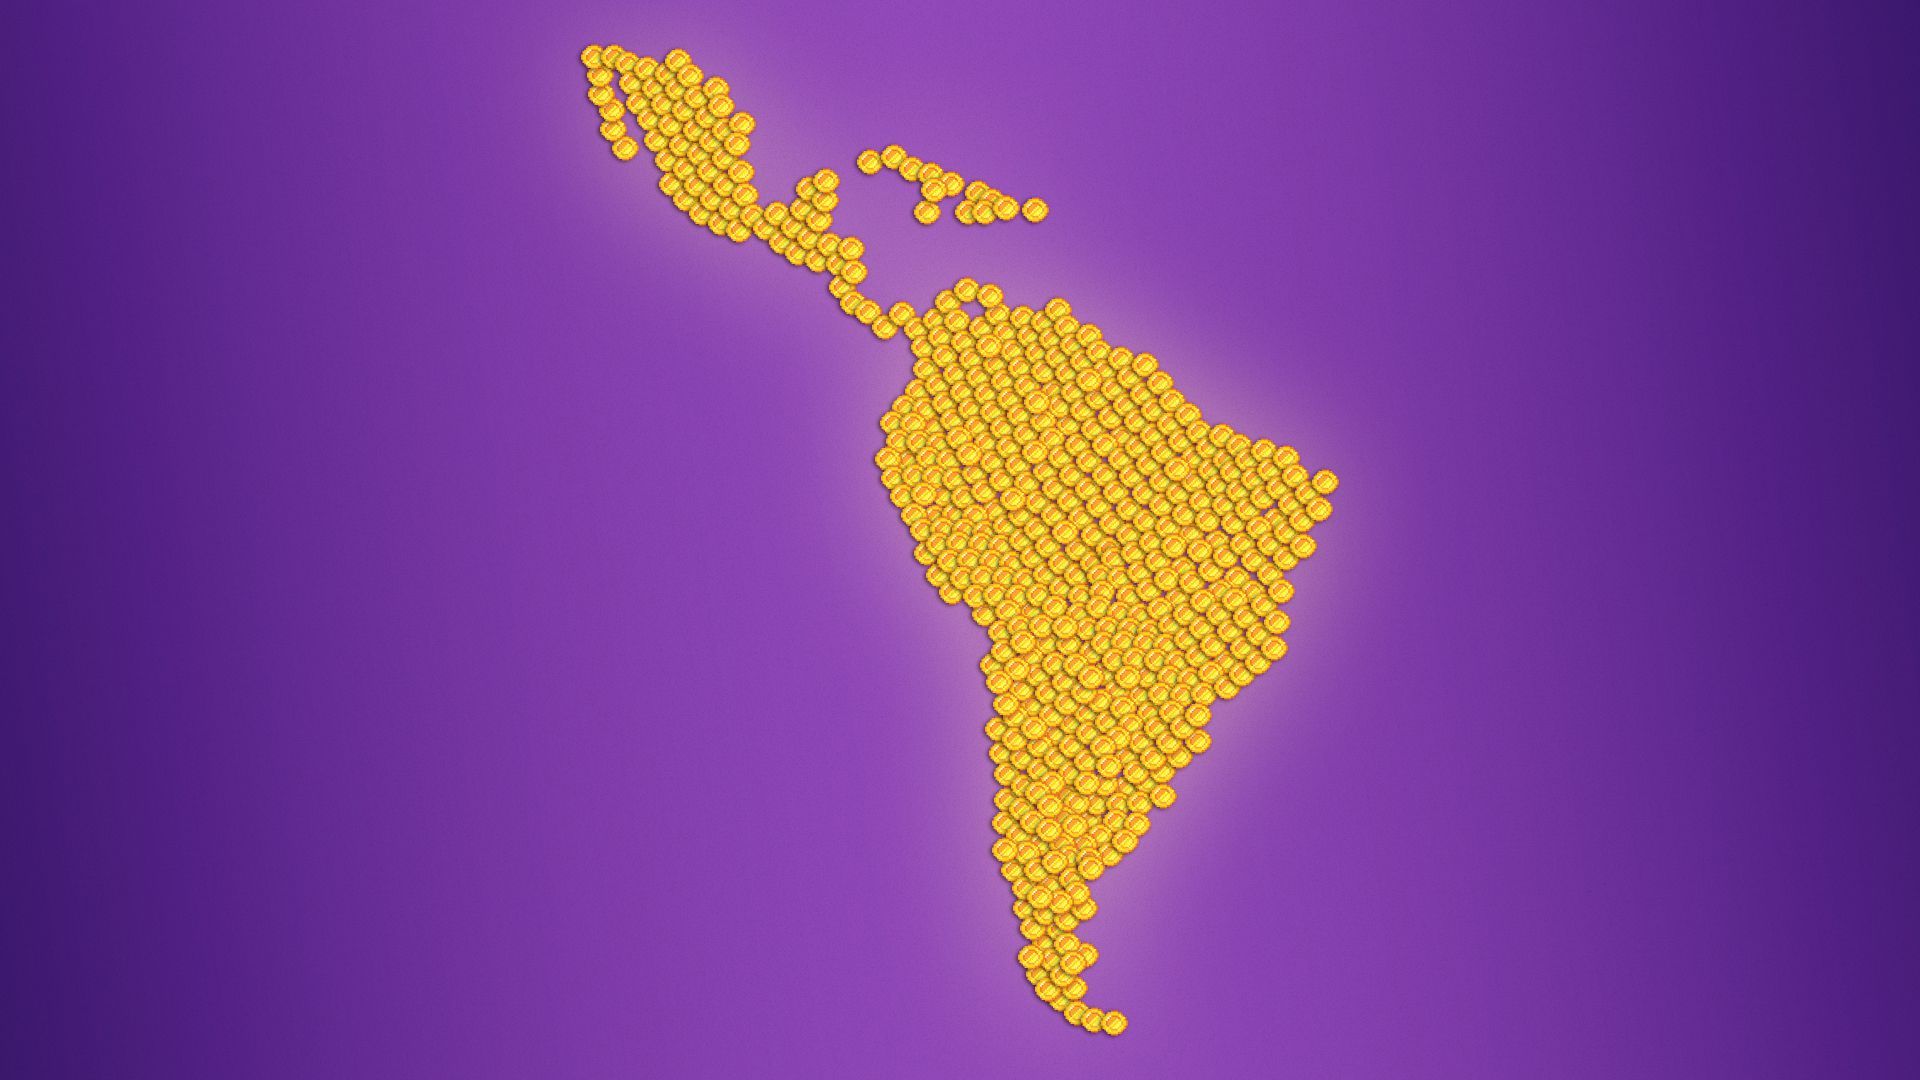 Illustration of dotted coins arranged in the form of Latin America.